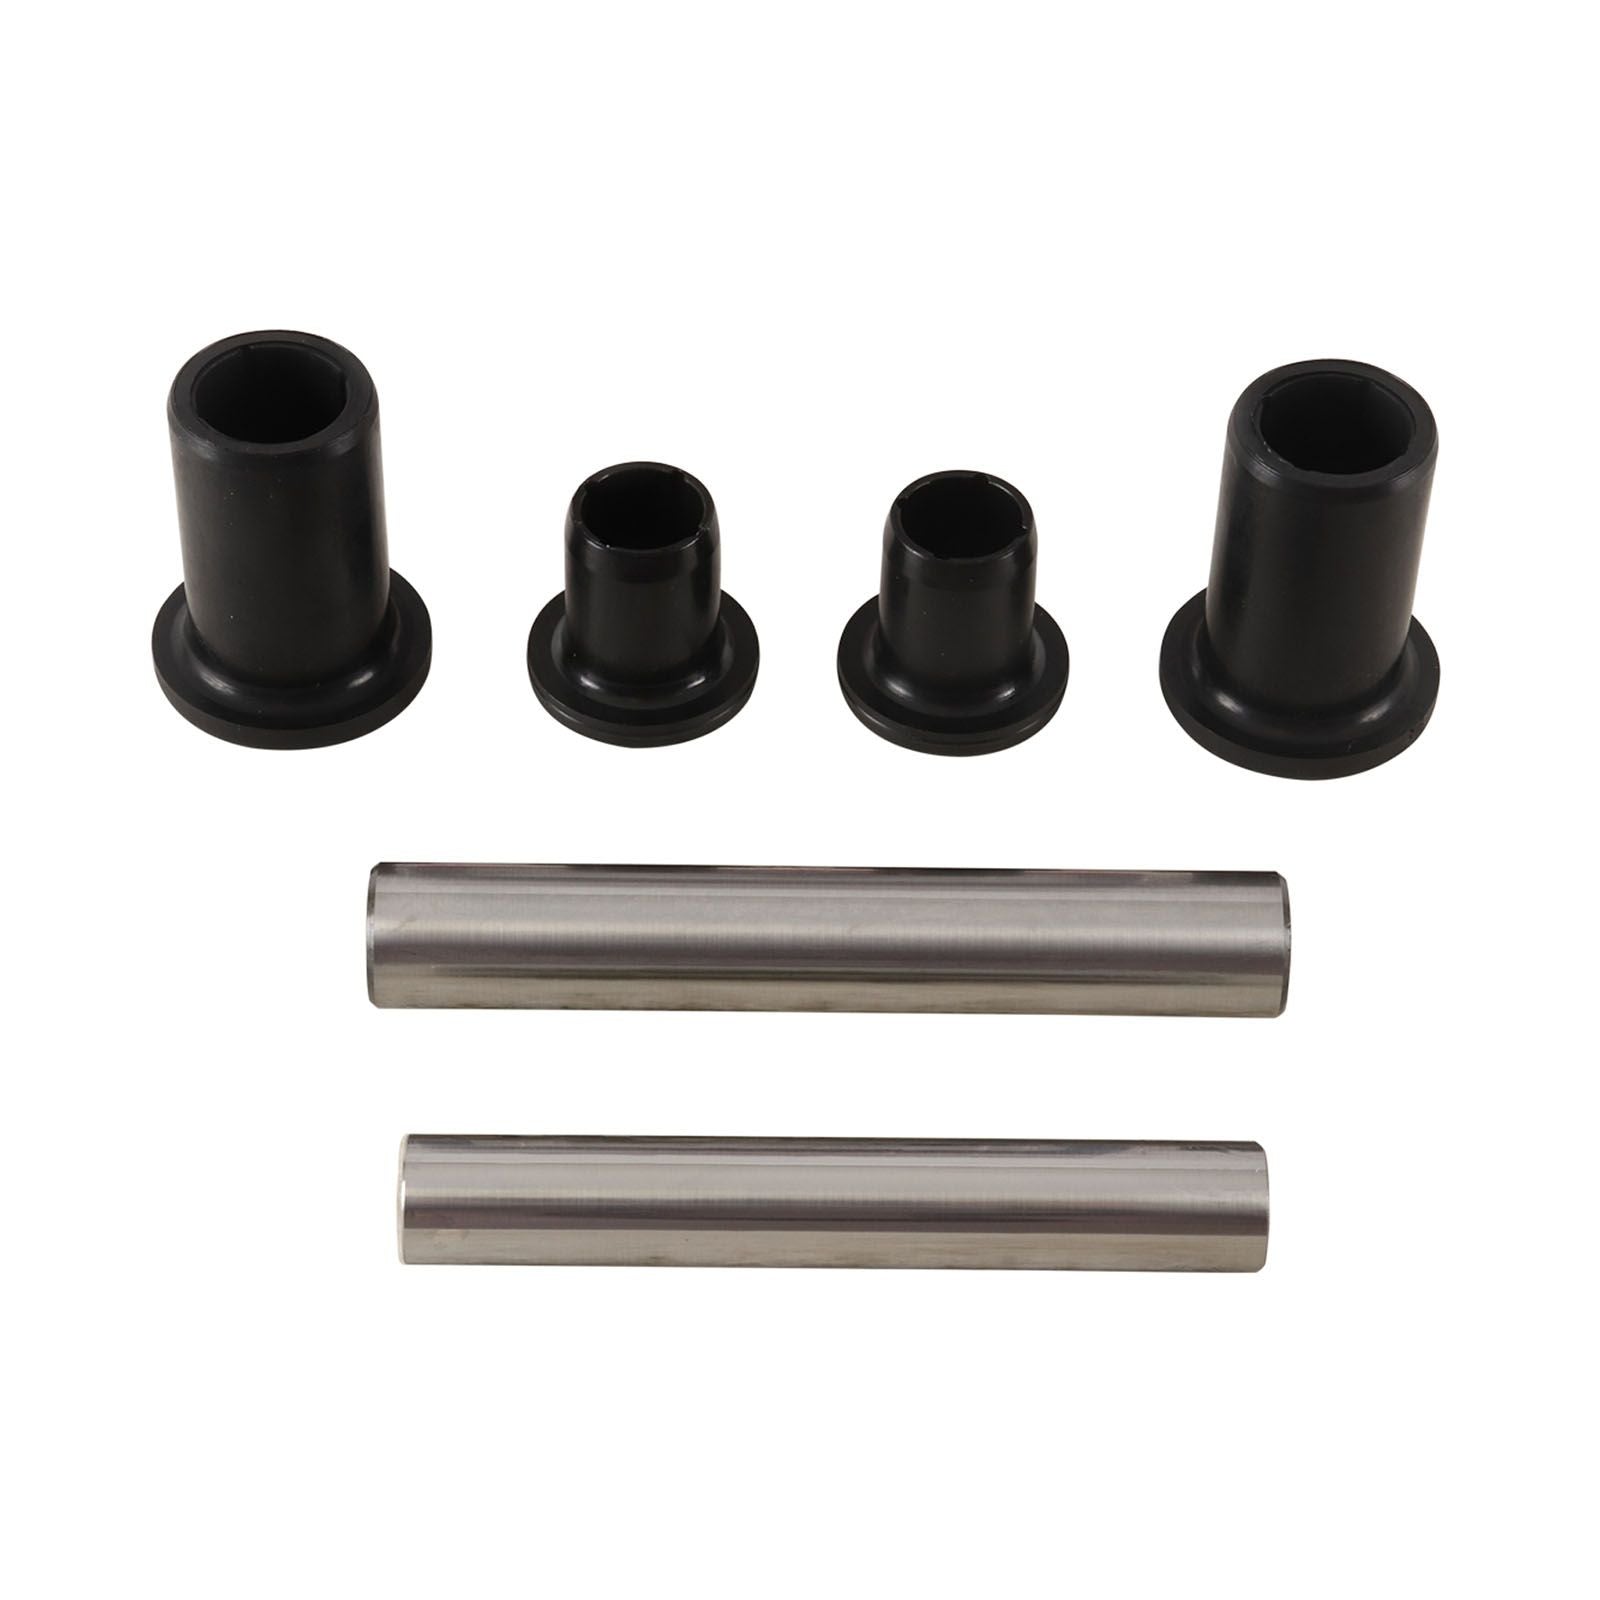 New ALL BALLS Racing Suspension Knuckle Only Kit - Rear #AB501207